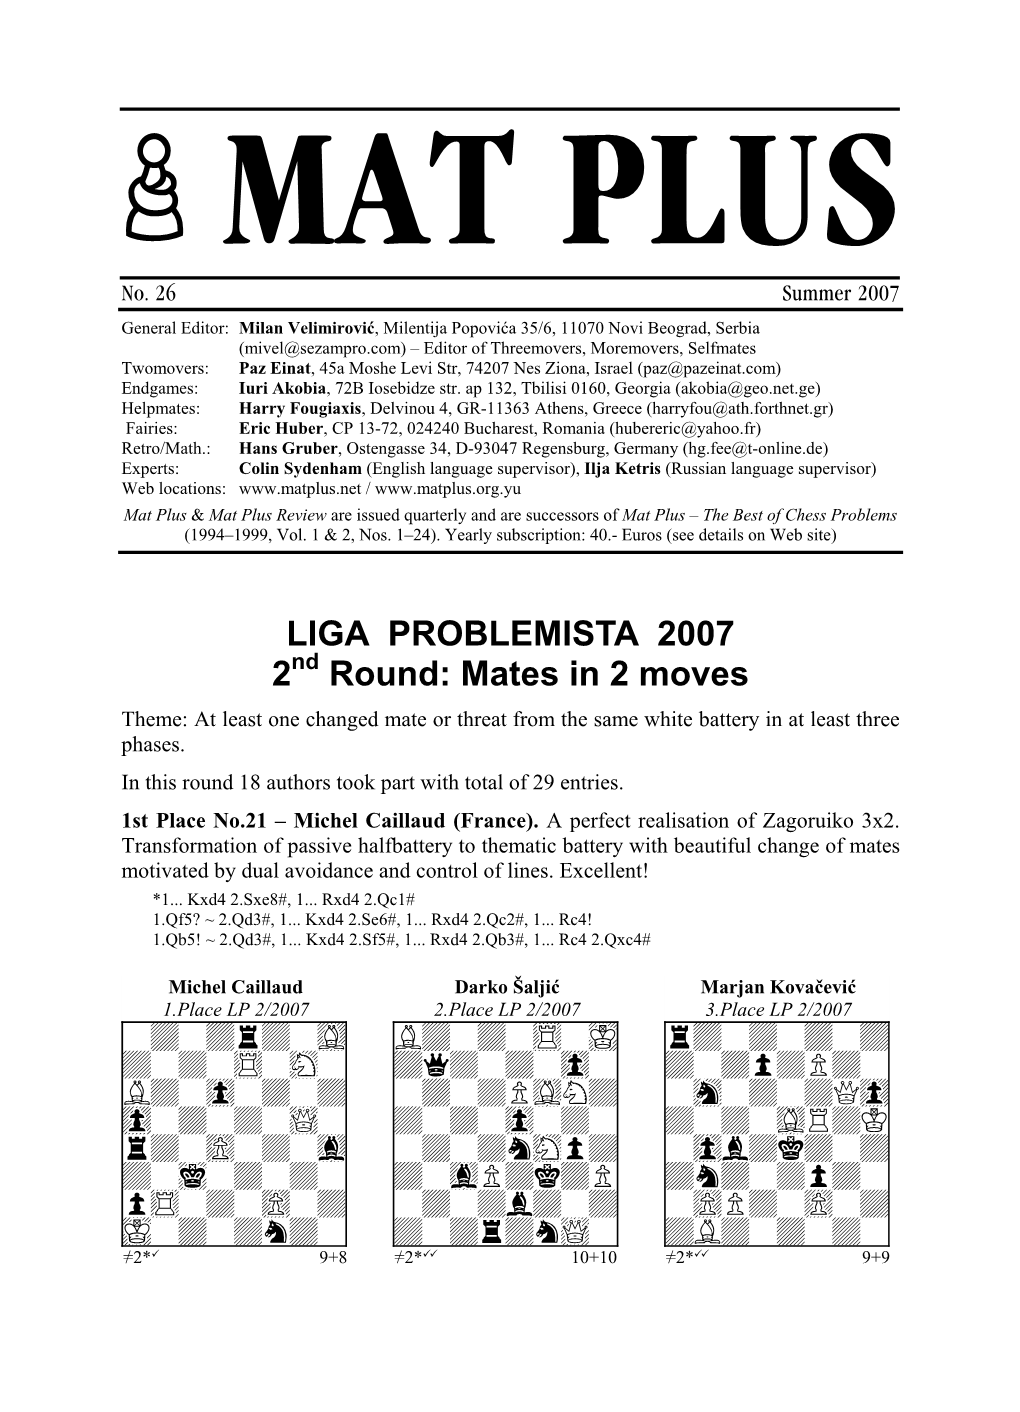 LIGA PROBLEMISTA 2007 2Nd Round: Mates in 2 Moves Theme: at Least One Changed Mate Or Threat from the Same White Battery in at Least Three Phases